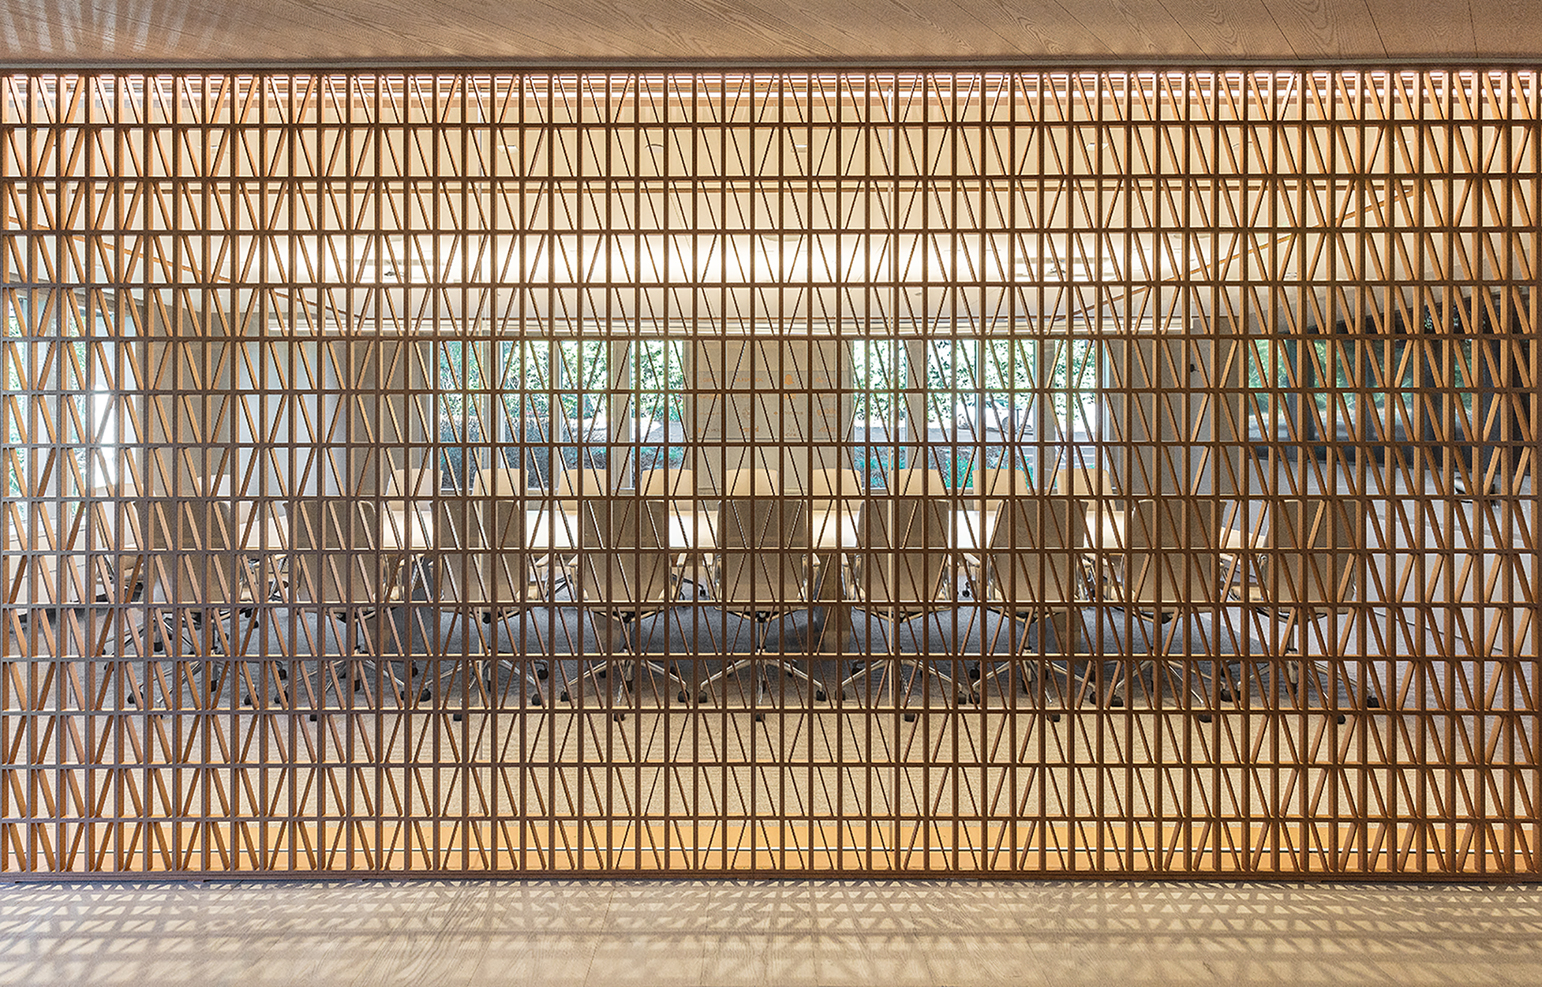 Bronze screens between conference rooms and corridors are backlit to create a play of light and shadow.